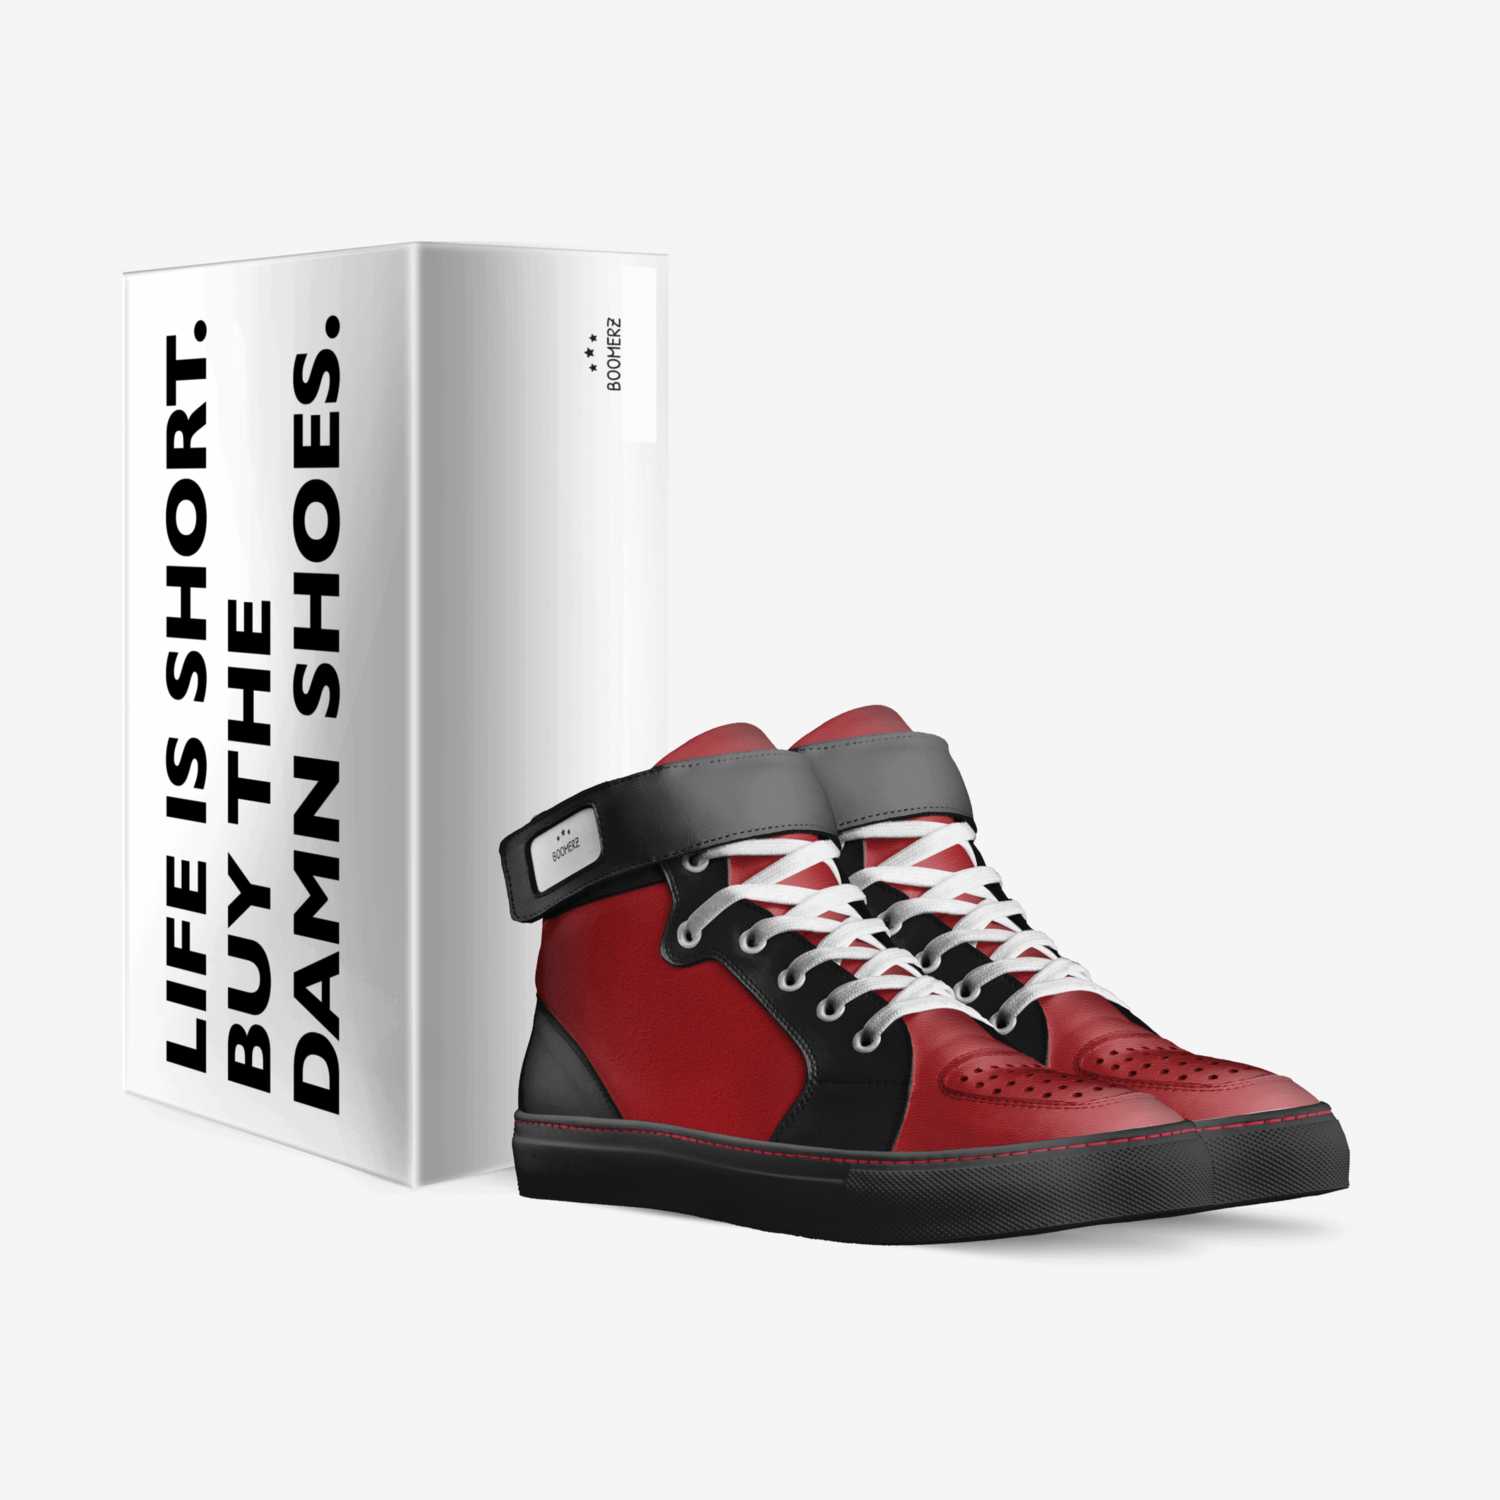 Boomerz custom made in Italy shoes by Lazaro Marquez | Box view